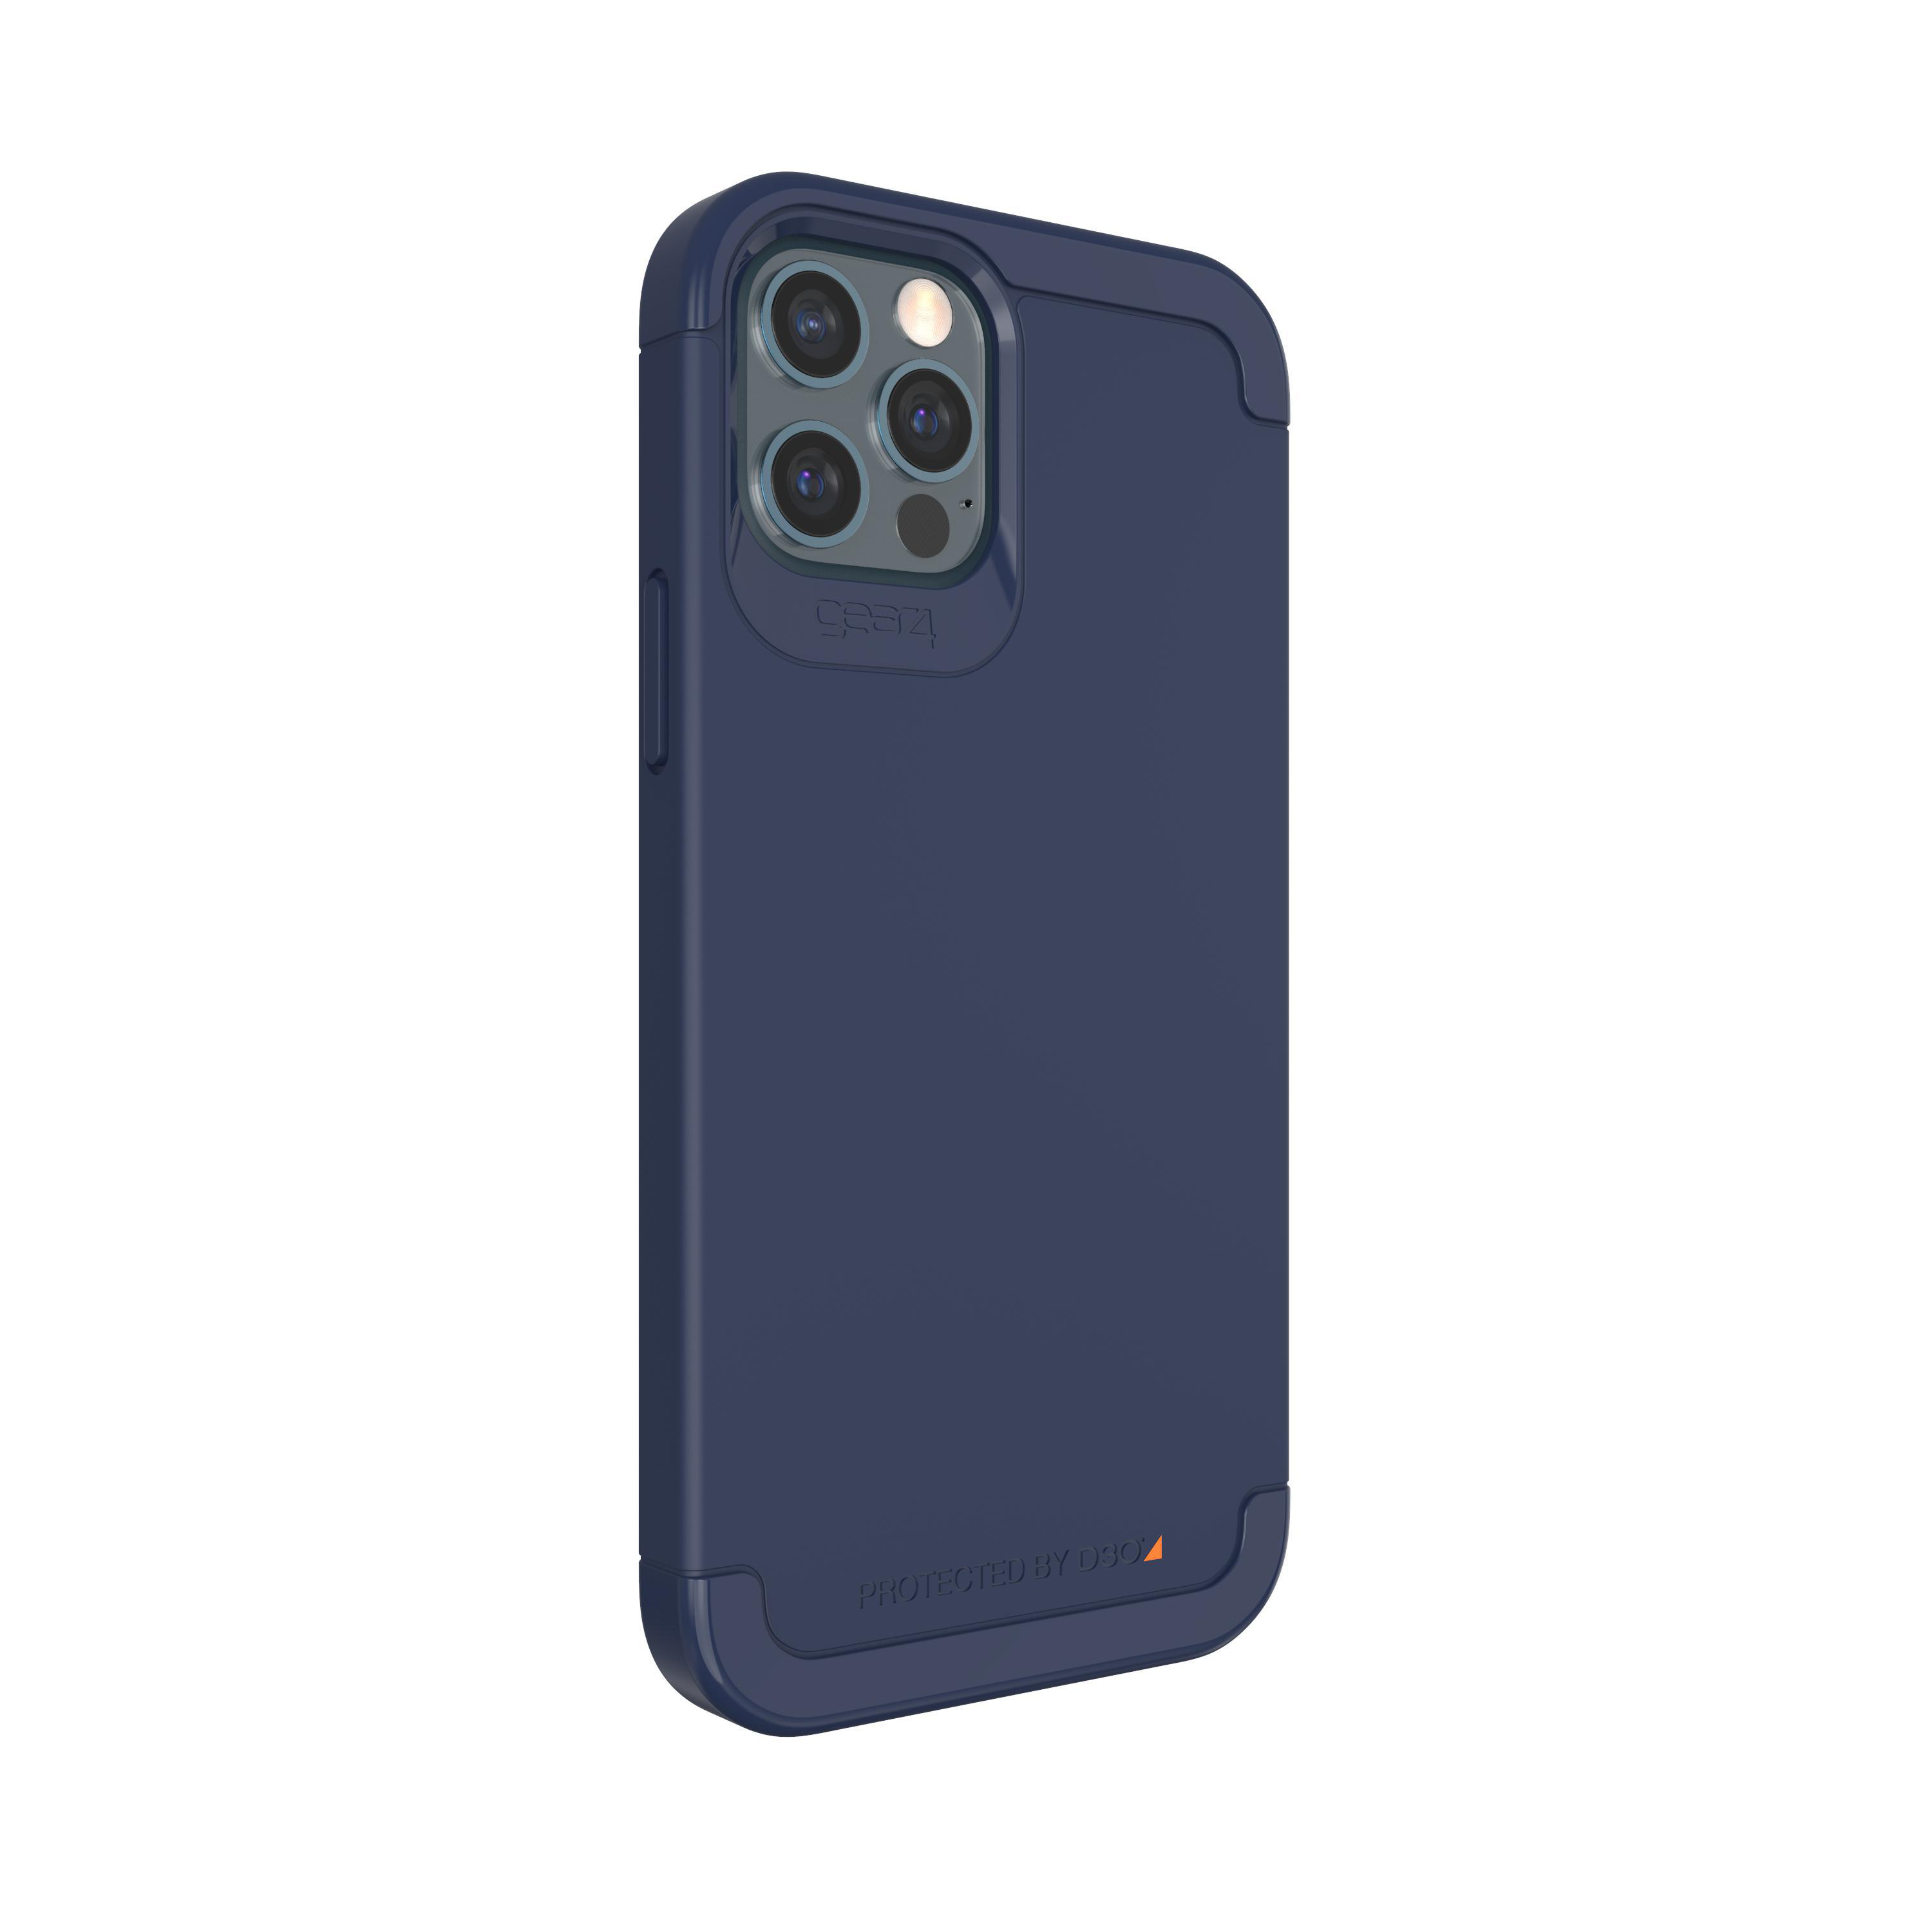 GEAR4 D3O Palette, Navy iPhone Apple, blue 12/12 Wembley Pro, Backcover